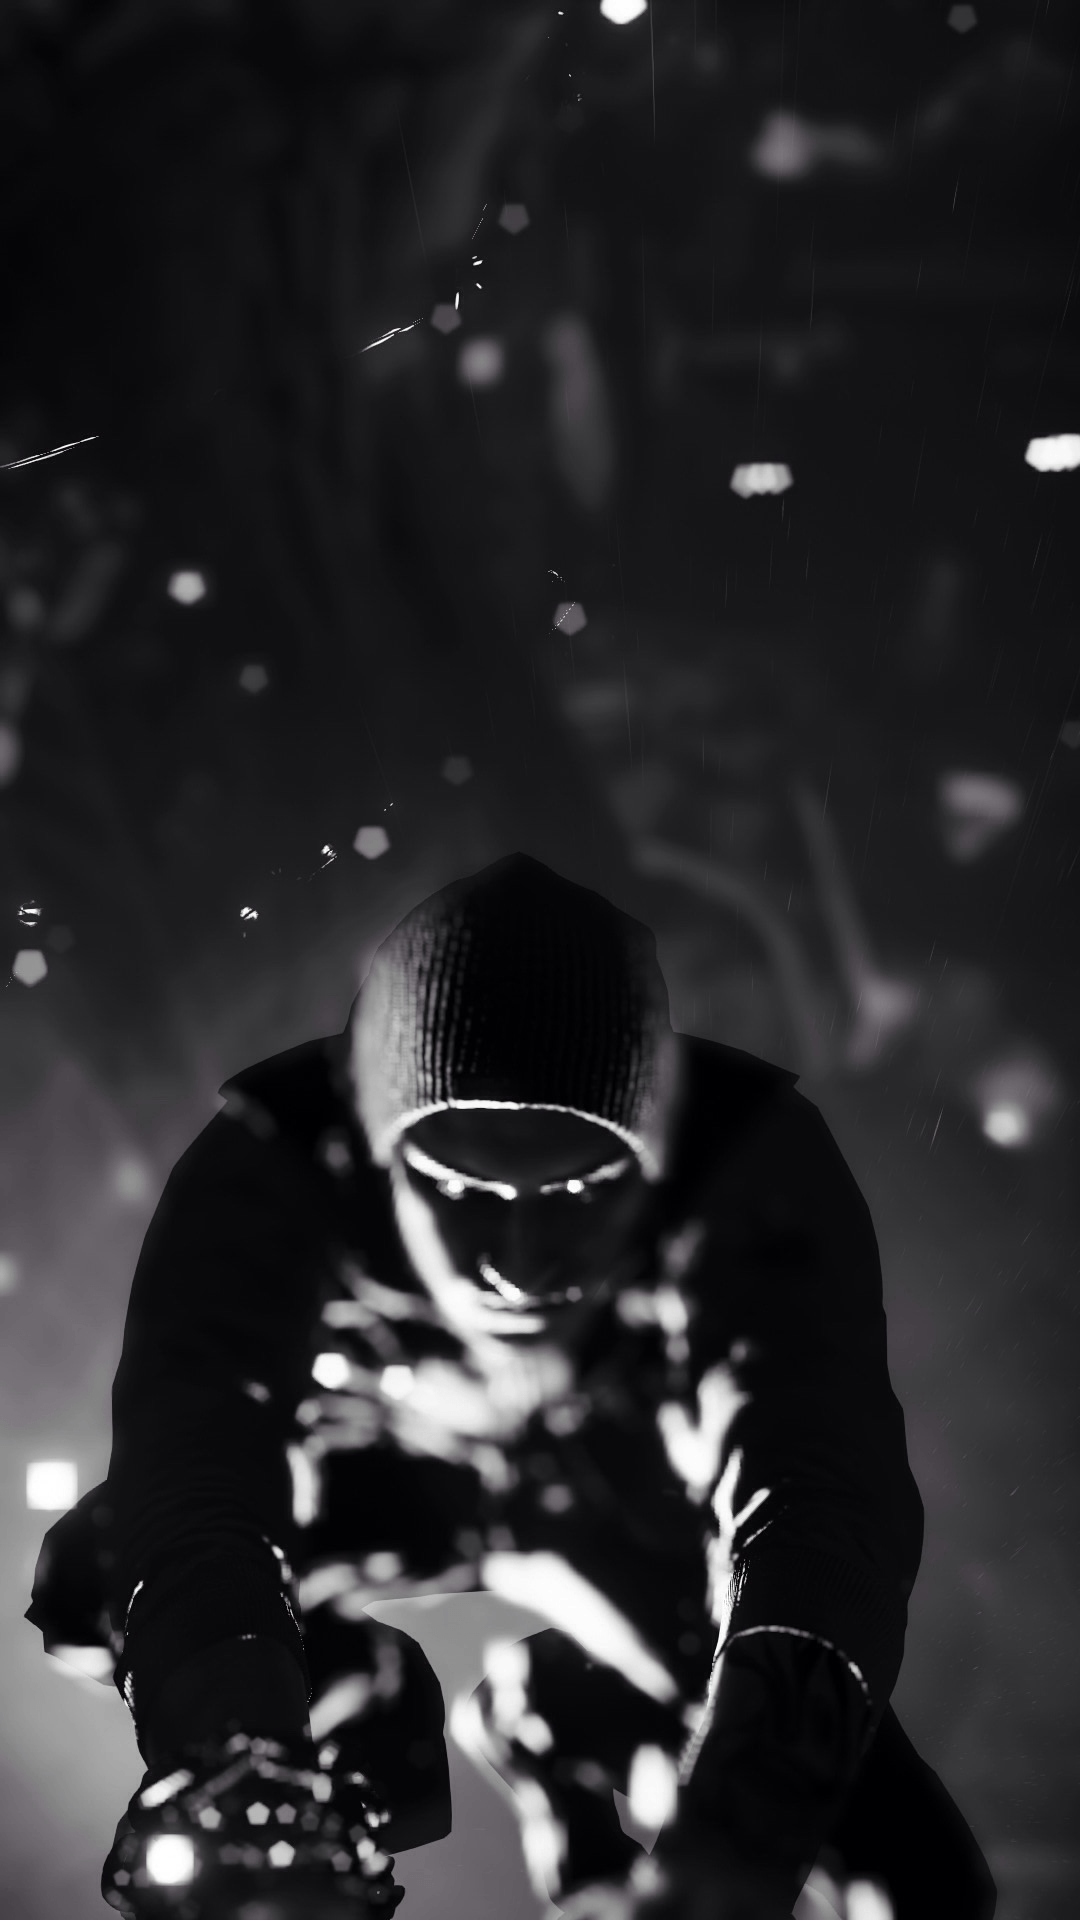 Infamous Second Son Black And White Android Wallpaper free download